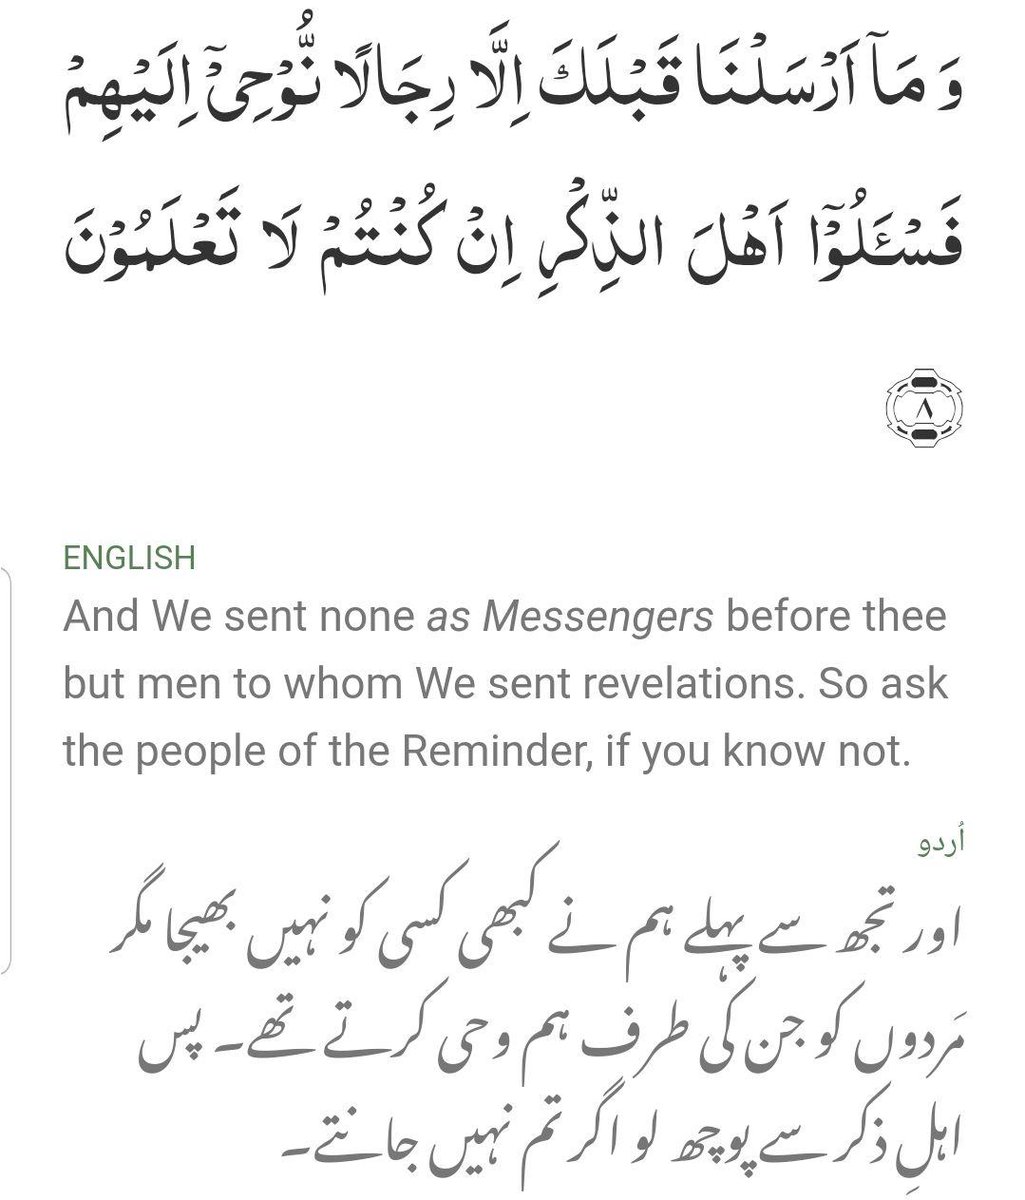 Verse 7: [25:21]Messengers are like normal people. They eat food & walk in the markets.Verse 8: [21:8-9]Every Messenger that came before Holy Prophet s.a had to nourish his body earthly through food in order to stay alive. No one was given a supernatural body including Jesus.